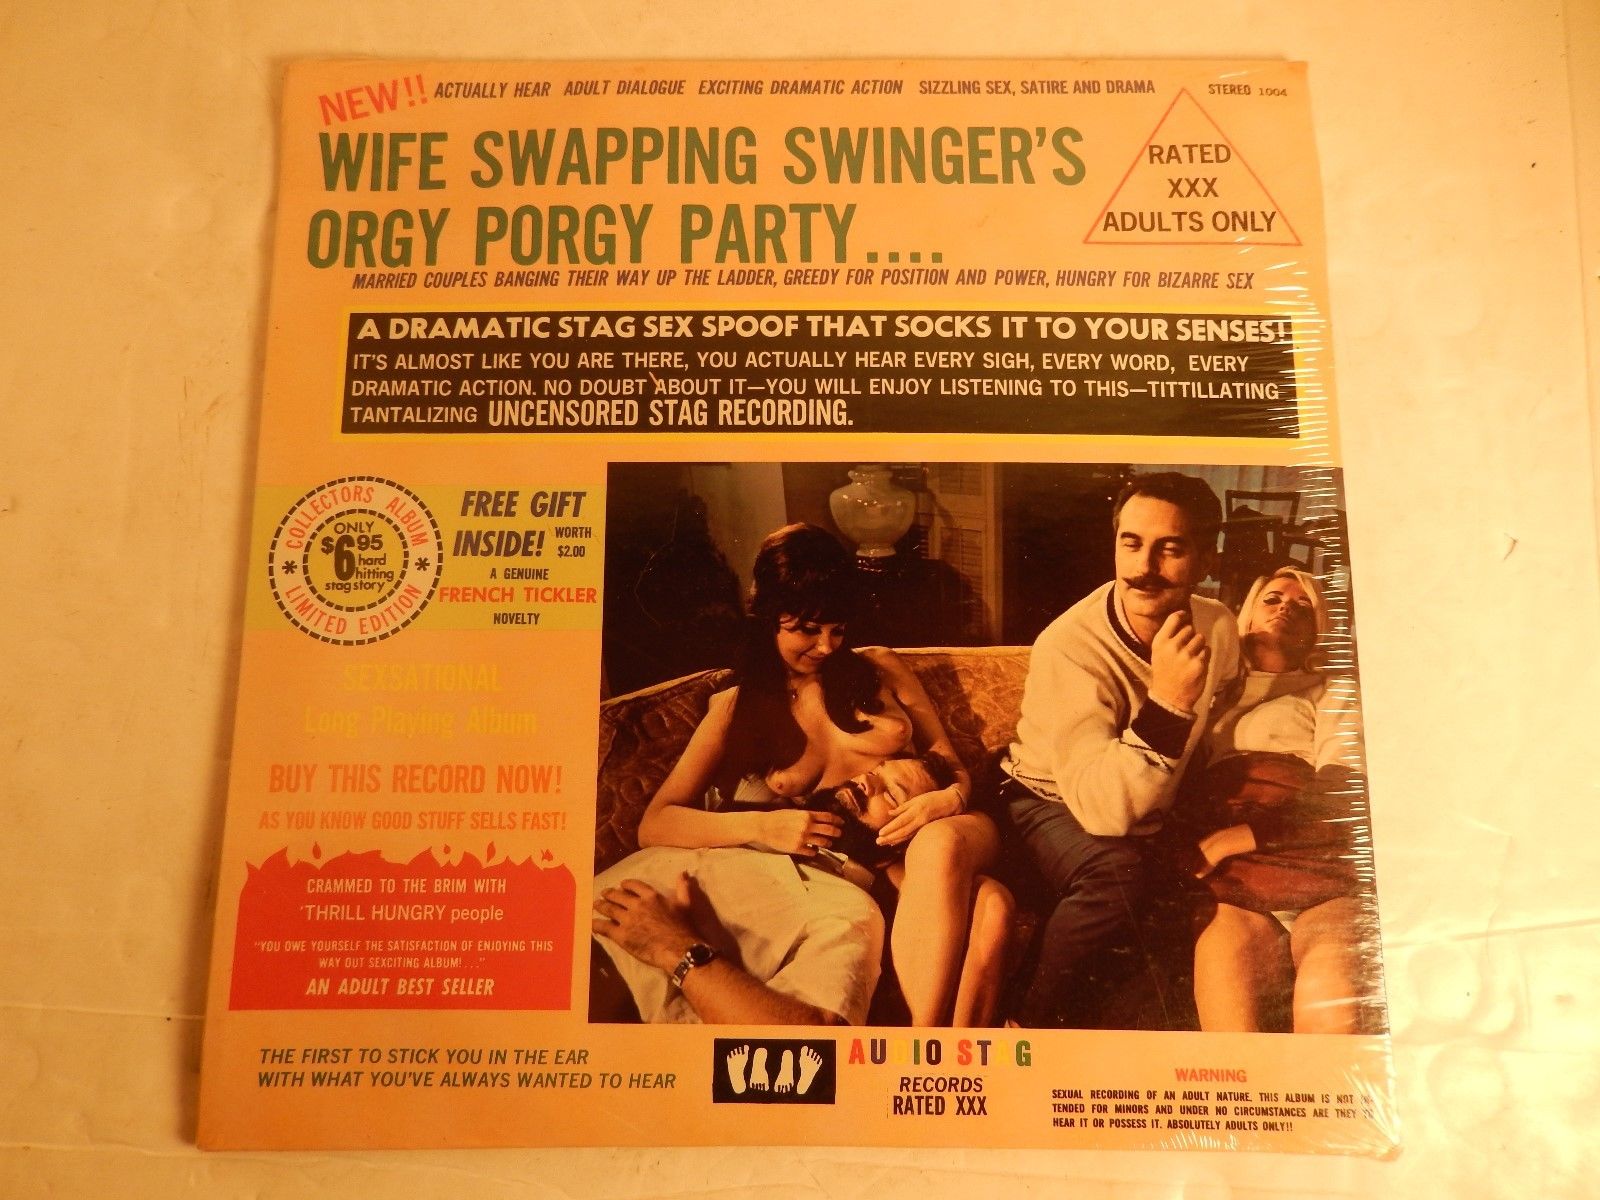 popsike - Vintage Sealed LP Audio Stag Records Adult XXX Wife Swapping Swingers Orgy Porgy photo photo